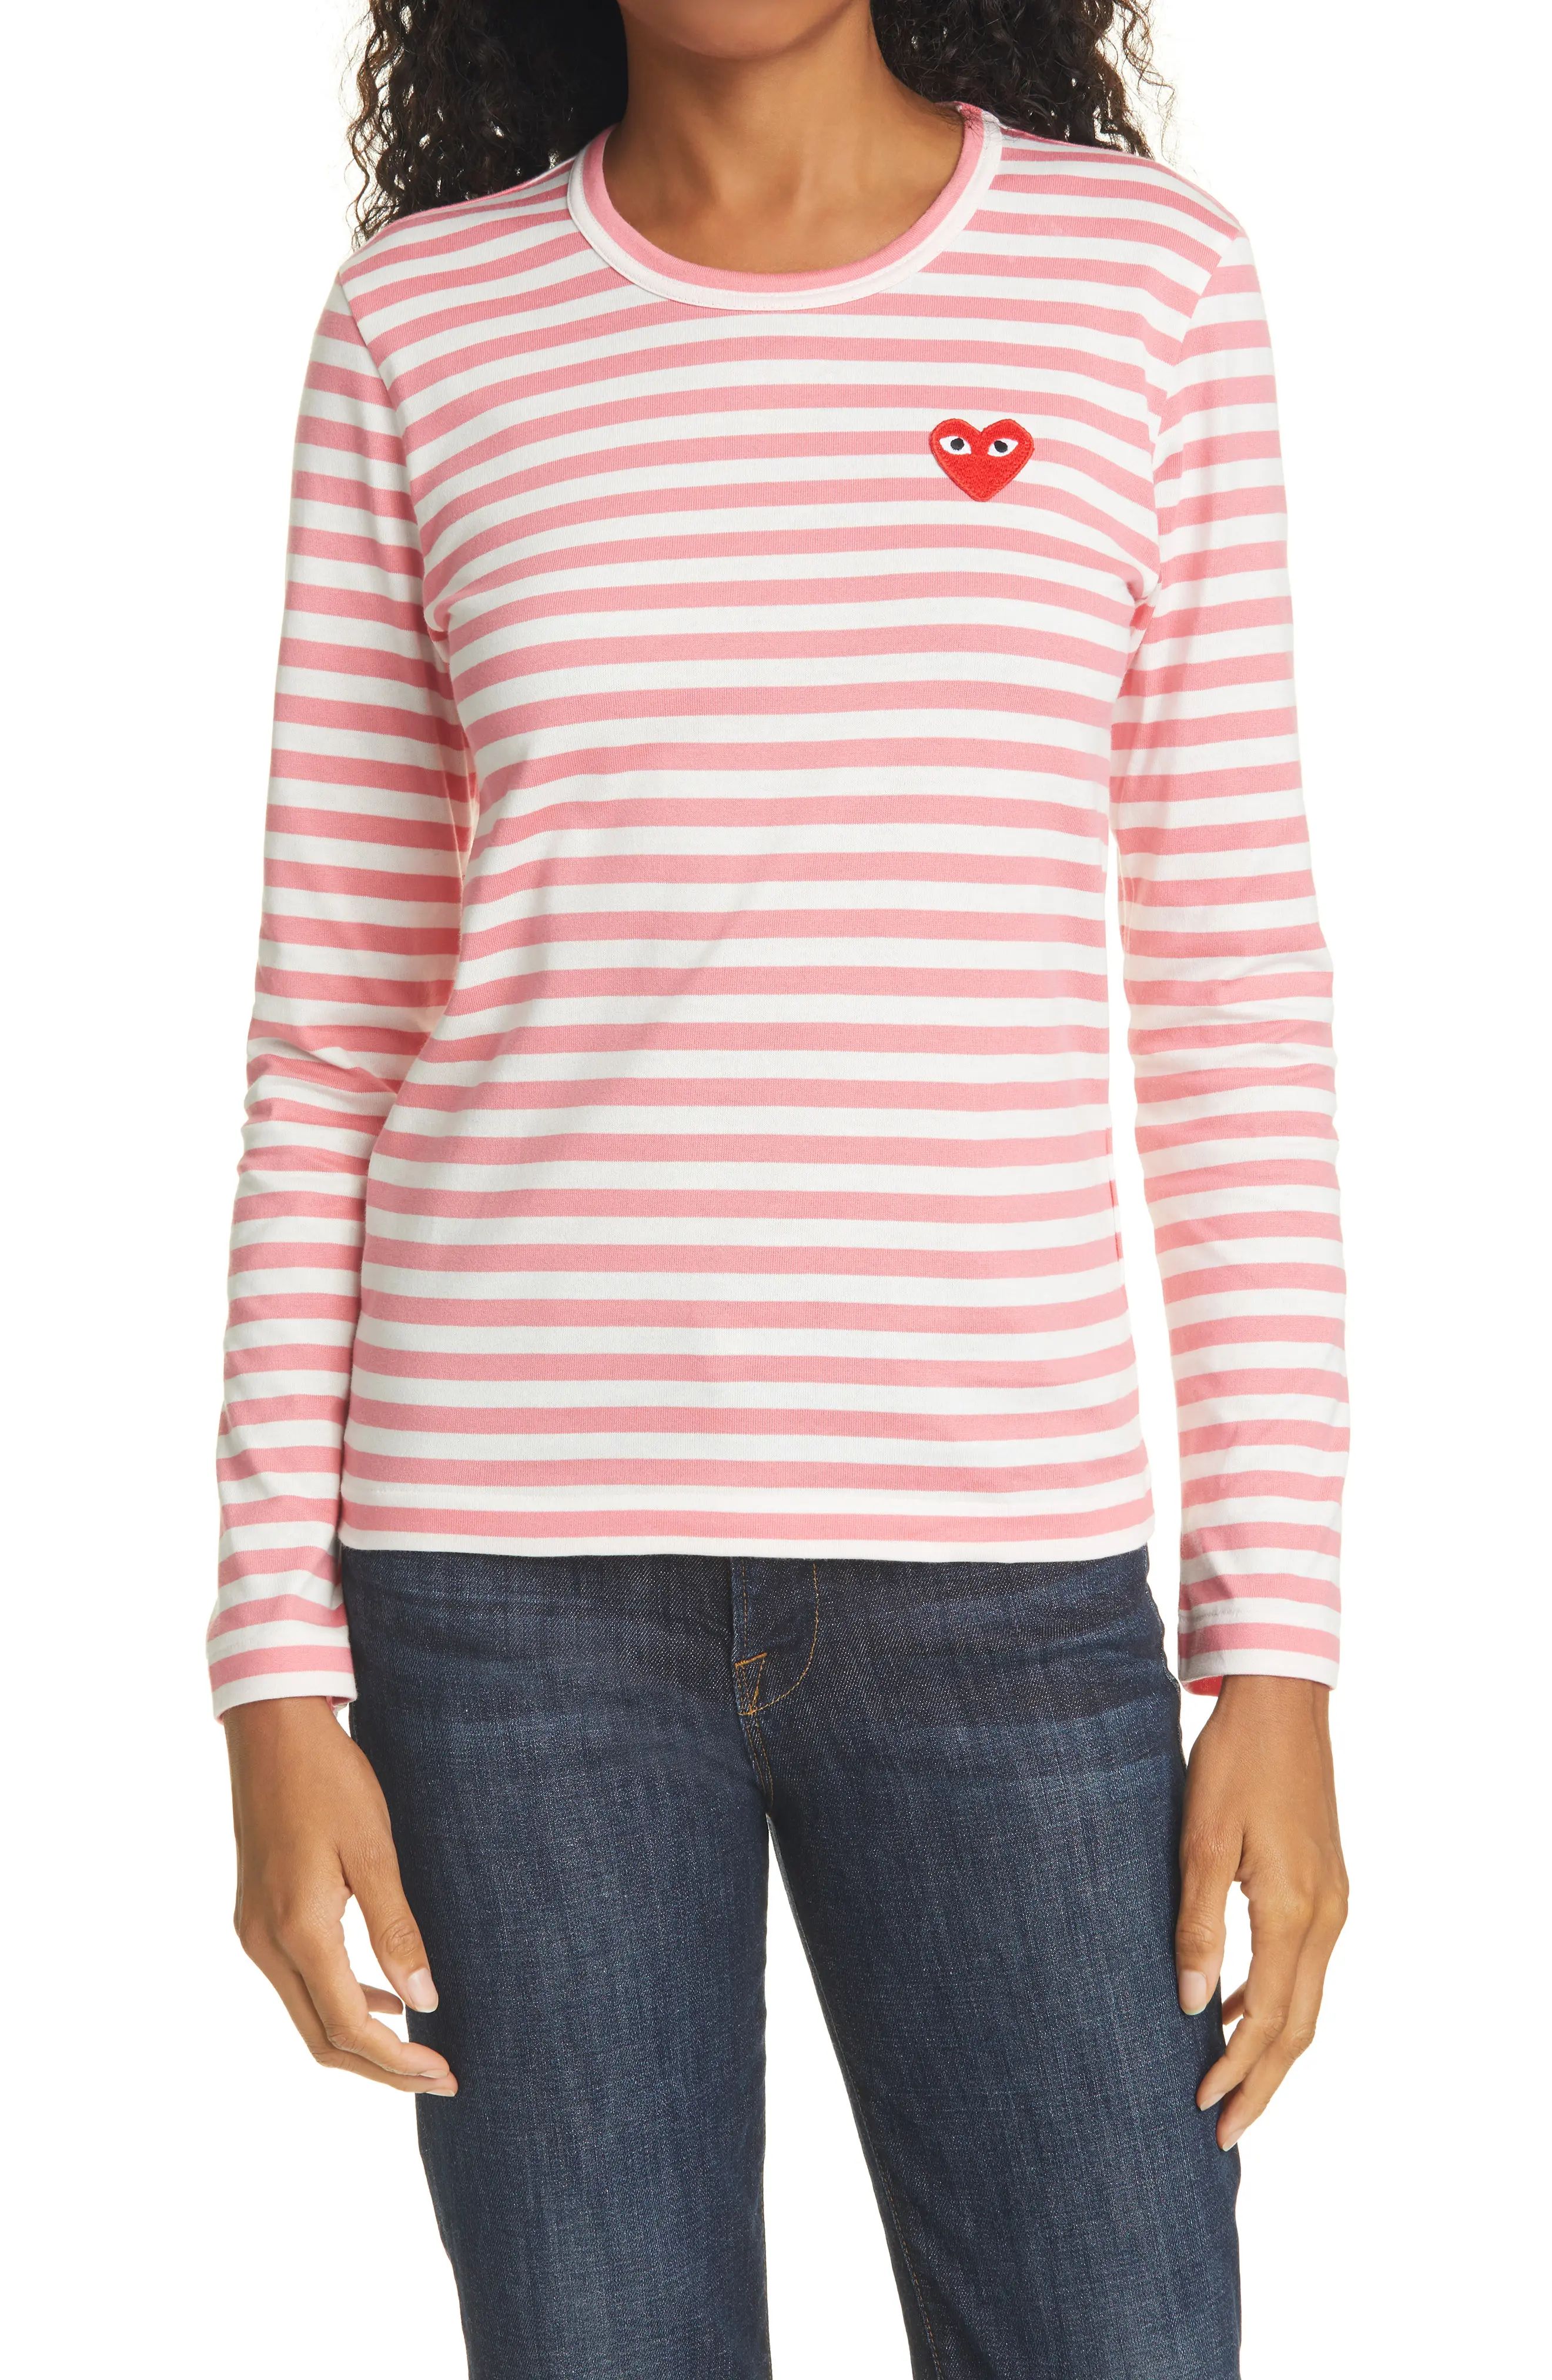 Women's Comme Des Garcons Play Stripe T-Shirt, Size Small - Pink | Nordstrom